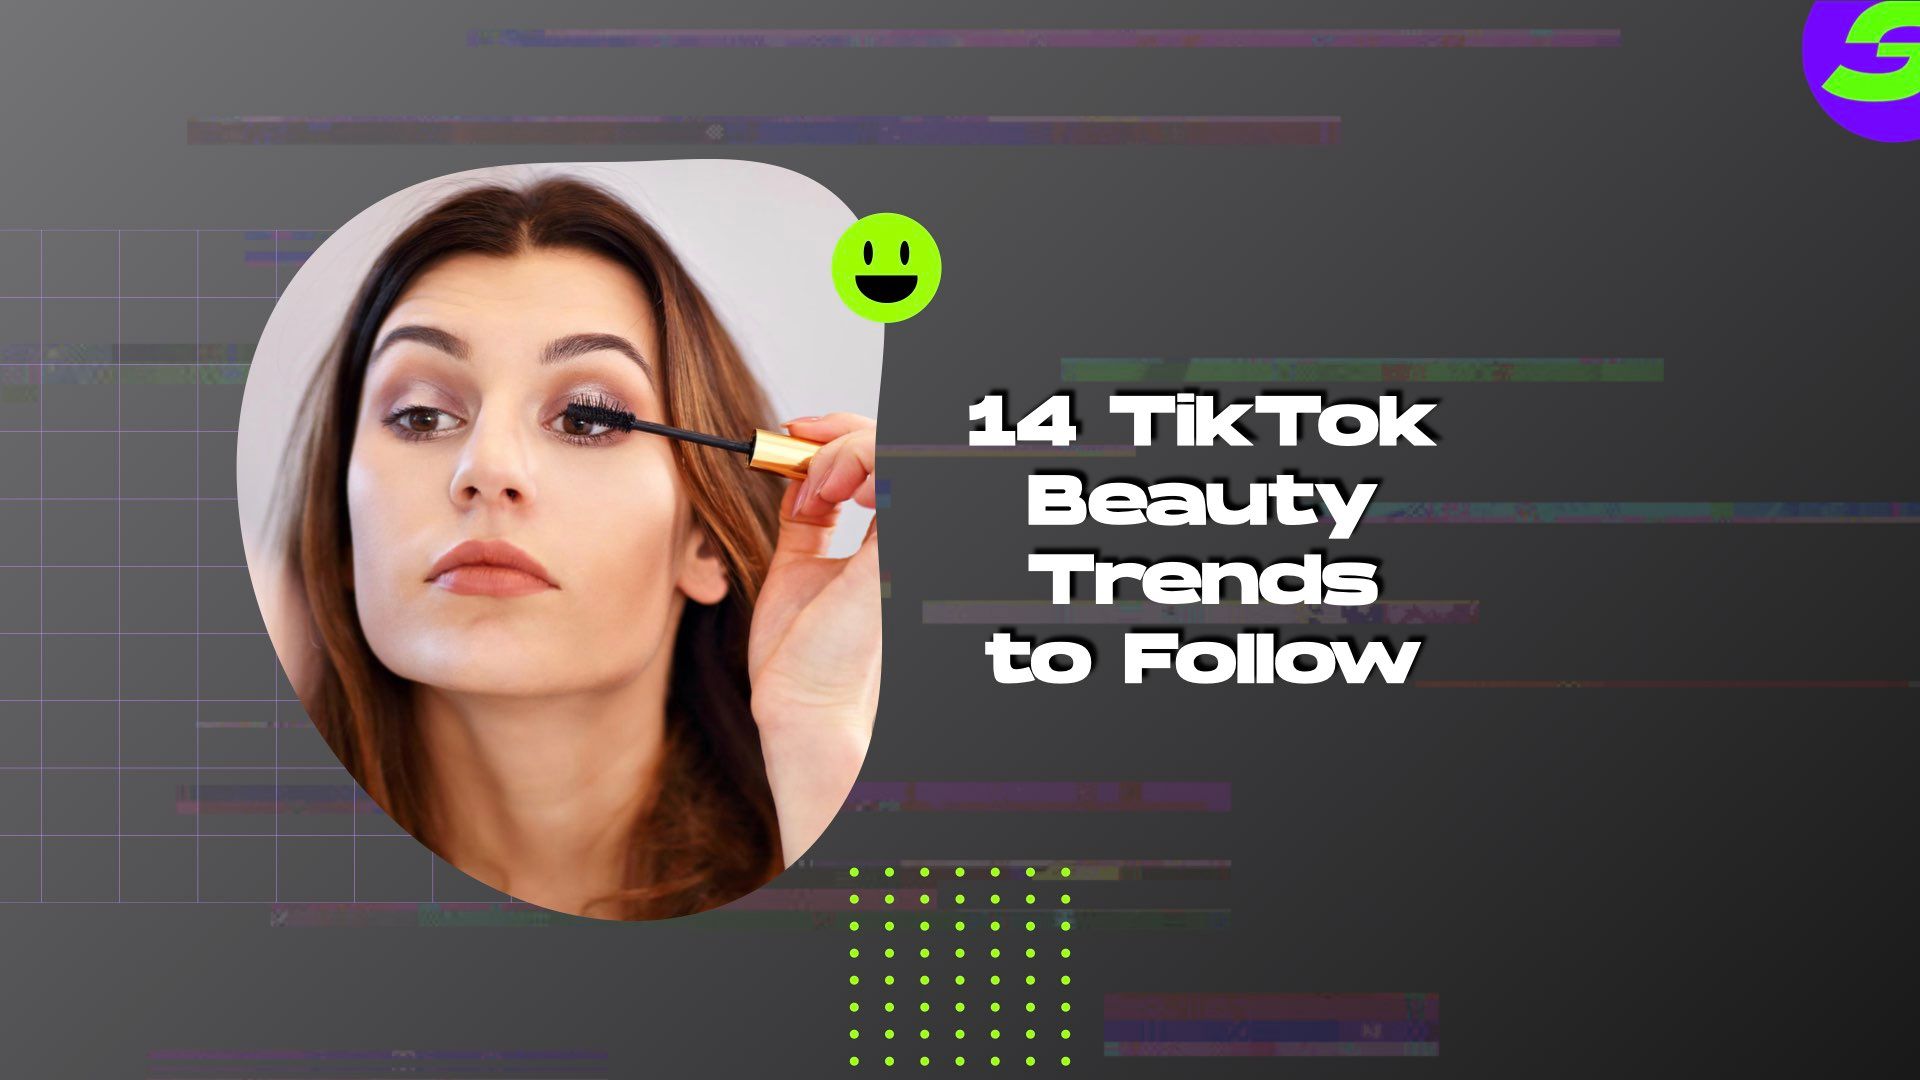 shotcut free video editor android 14 TikTok Beauty Trends